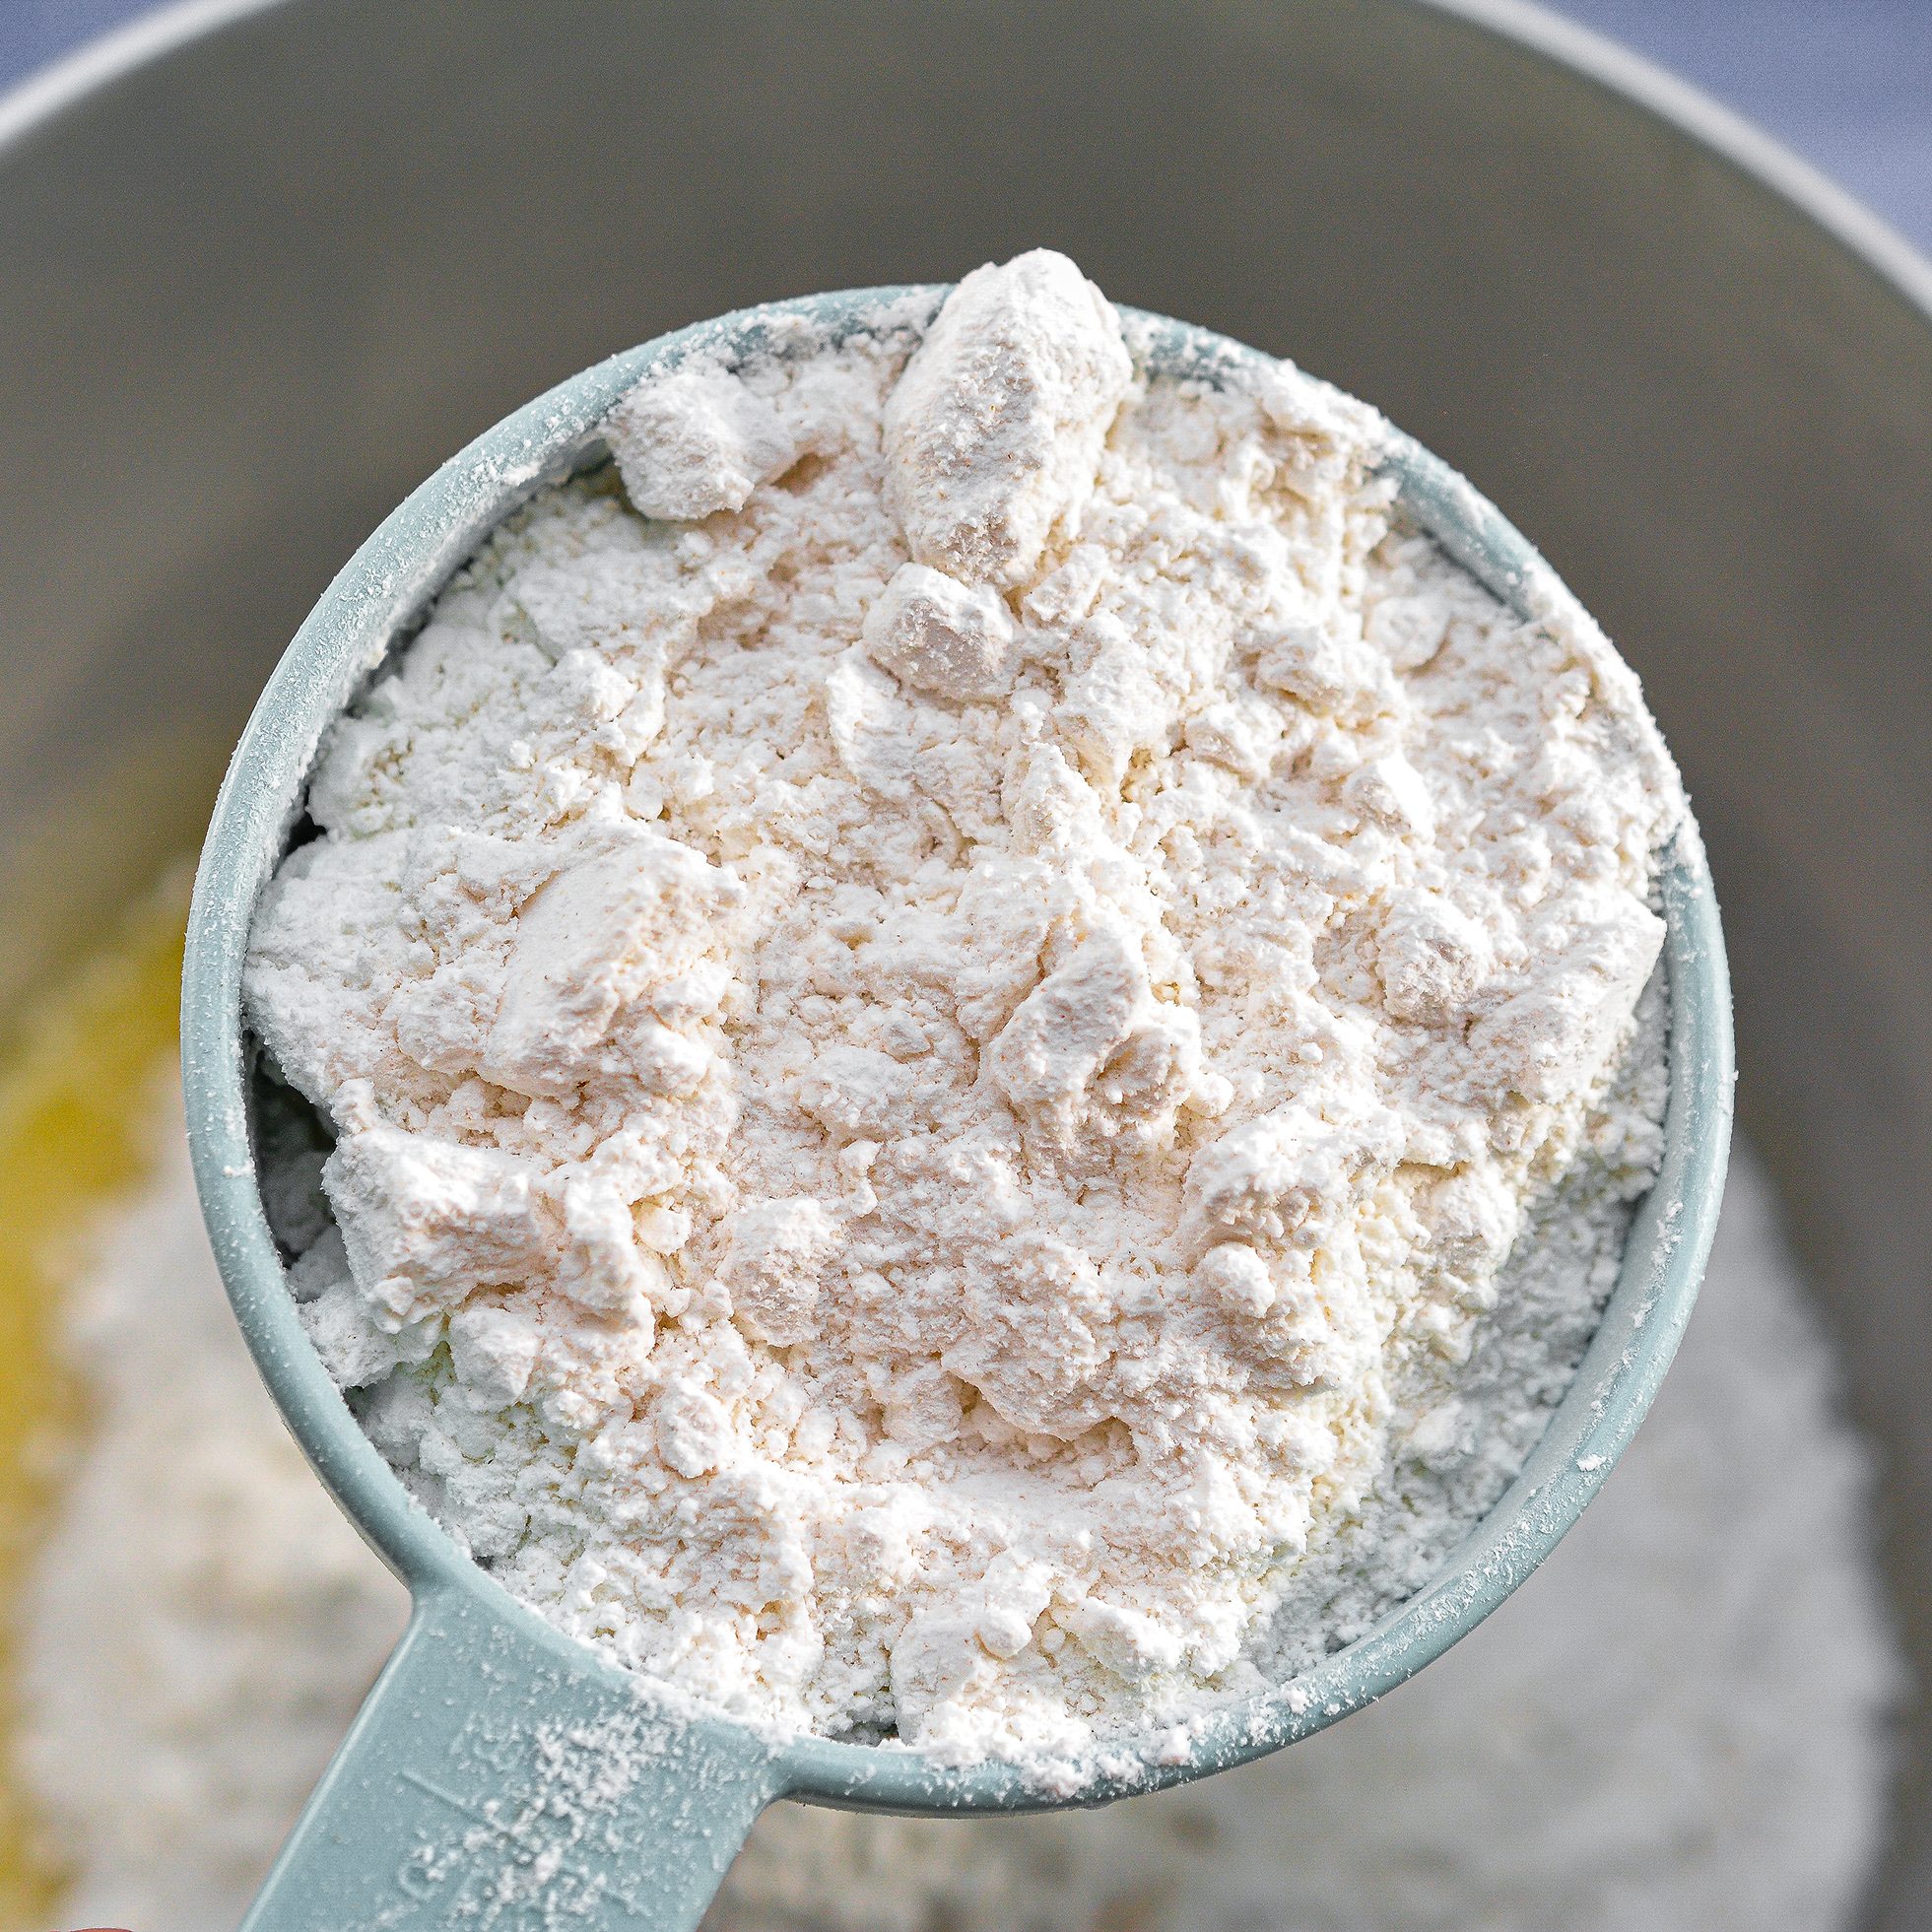 Add the flour and cinnamon to the batter and blend until smooth and thick.